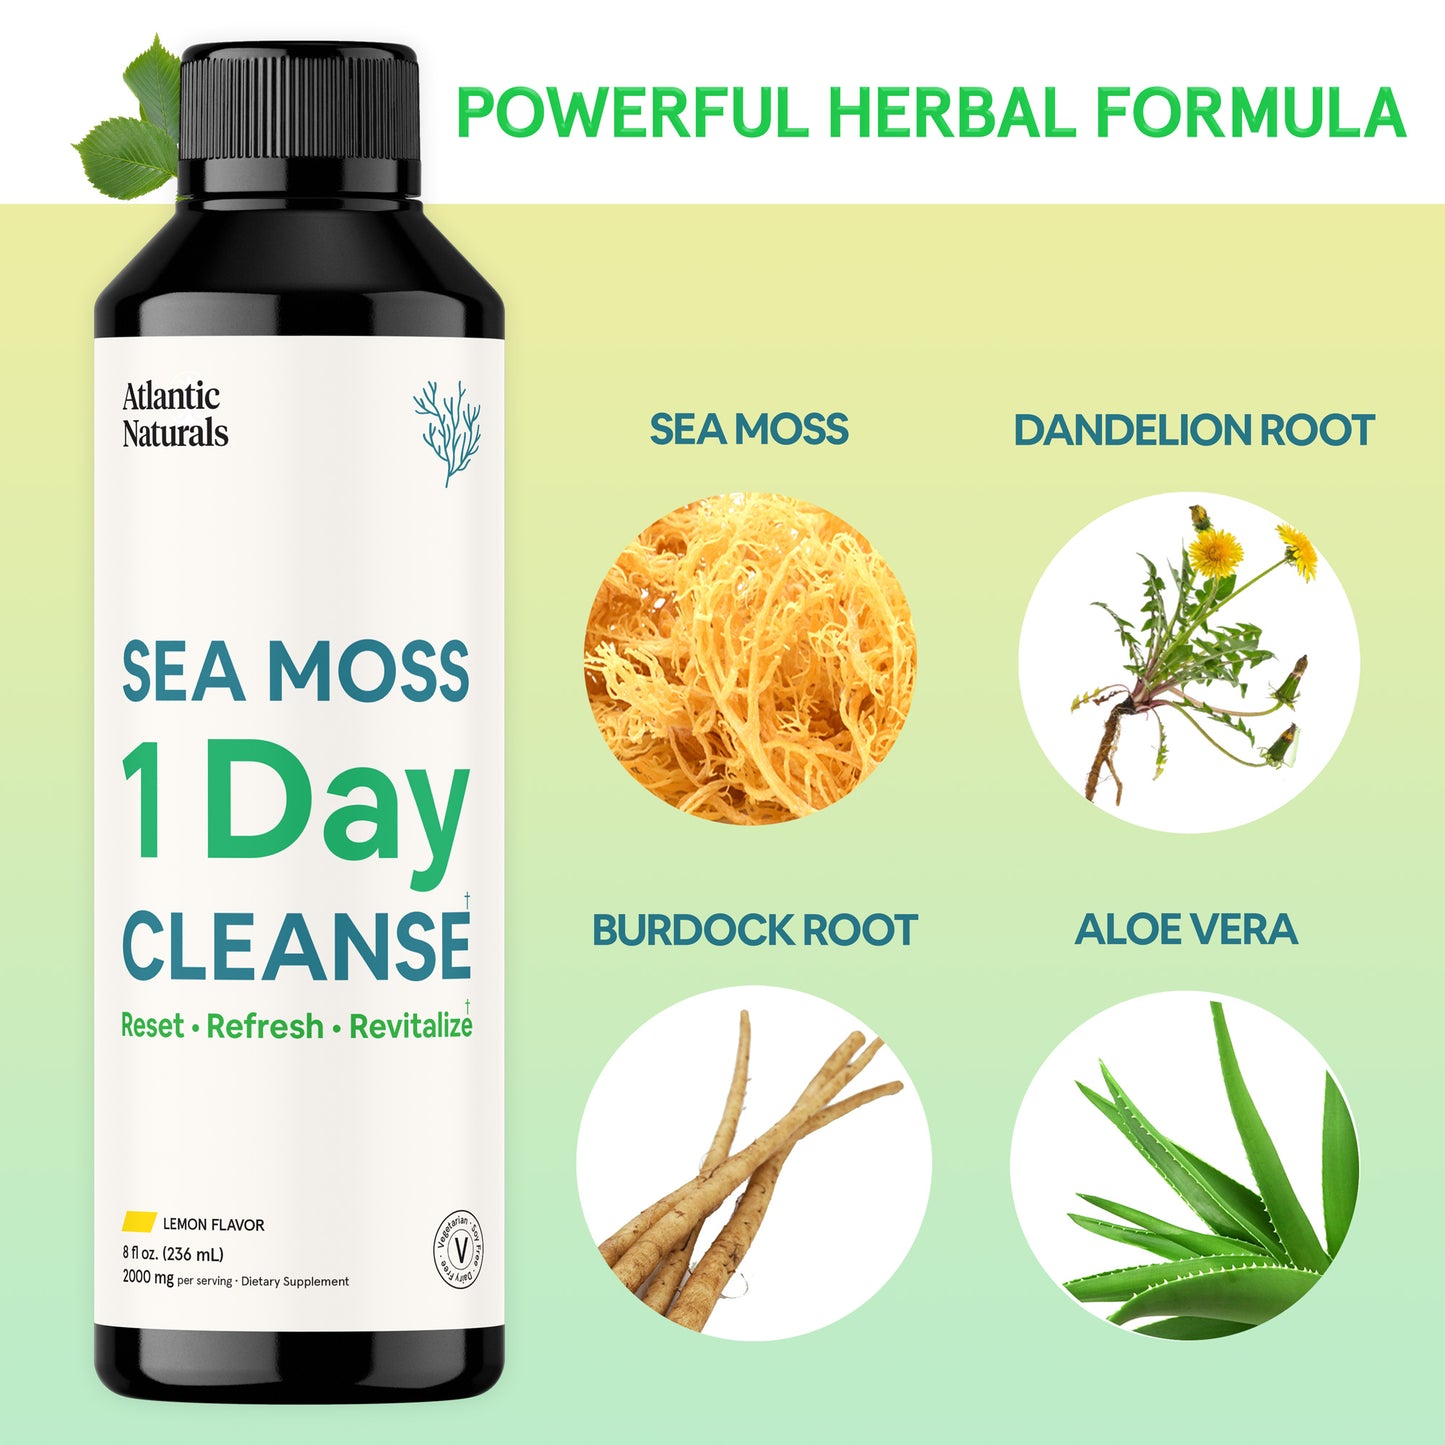 Sea Moss 1 Day Cleanse